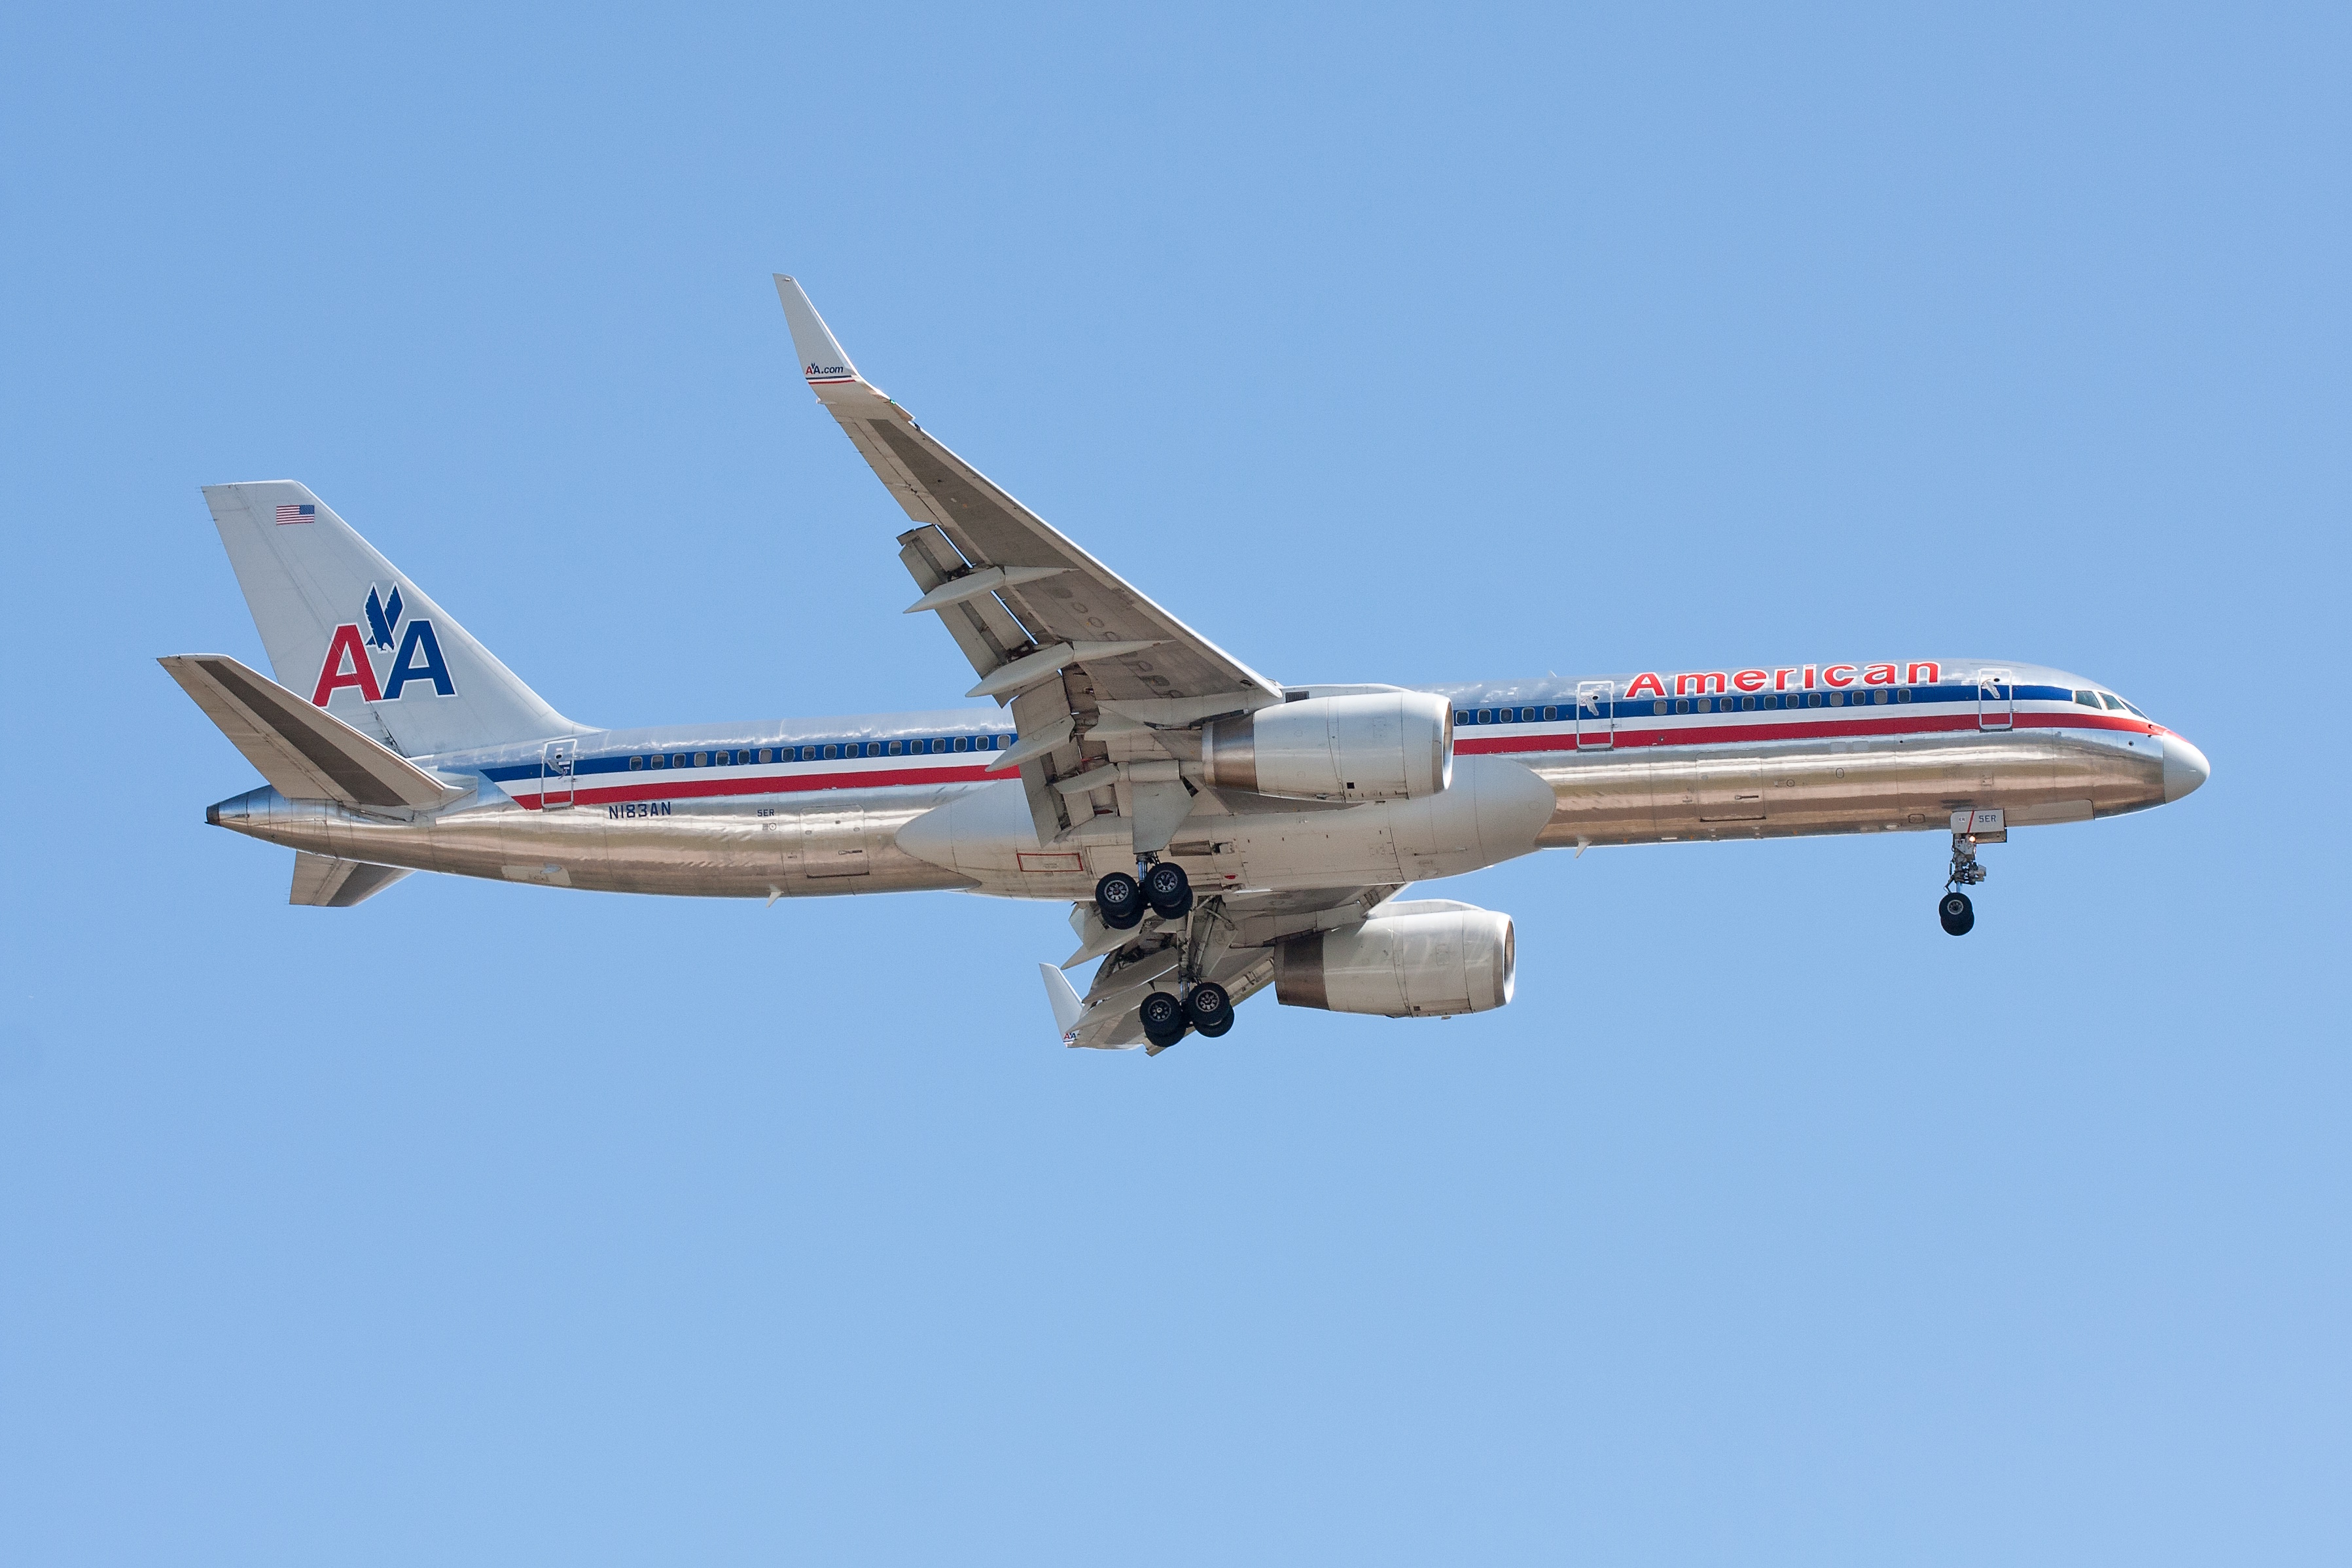 American_Airlines_Commercial_Jet_0361.jpg